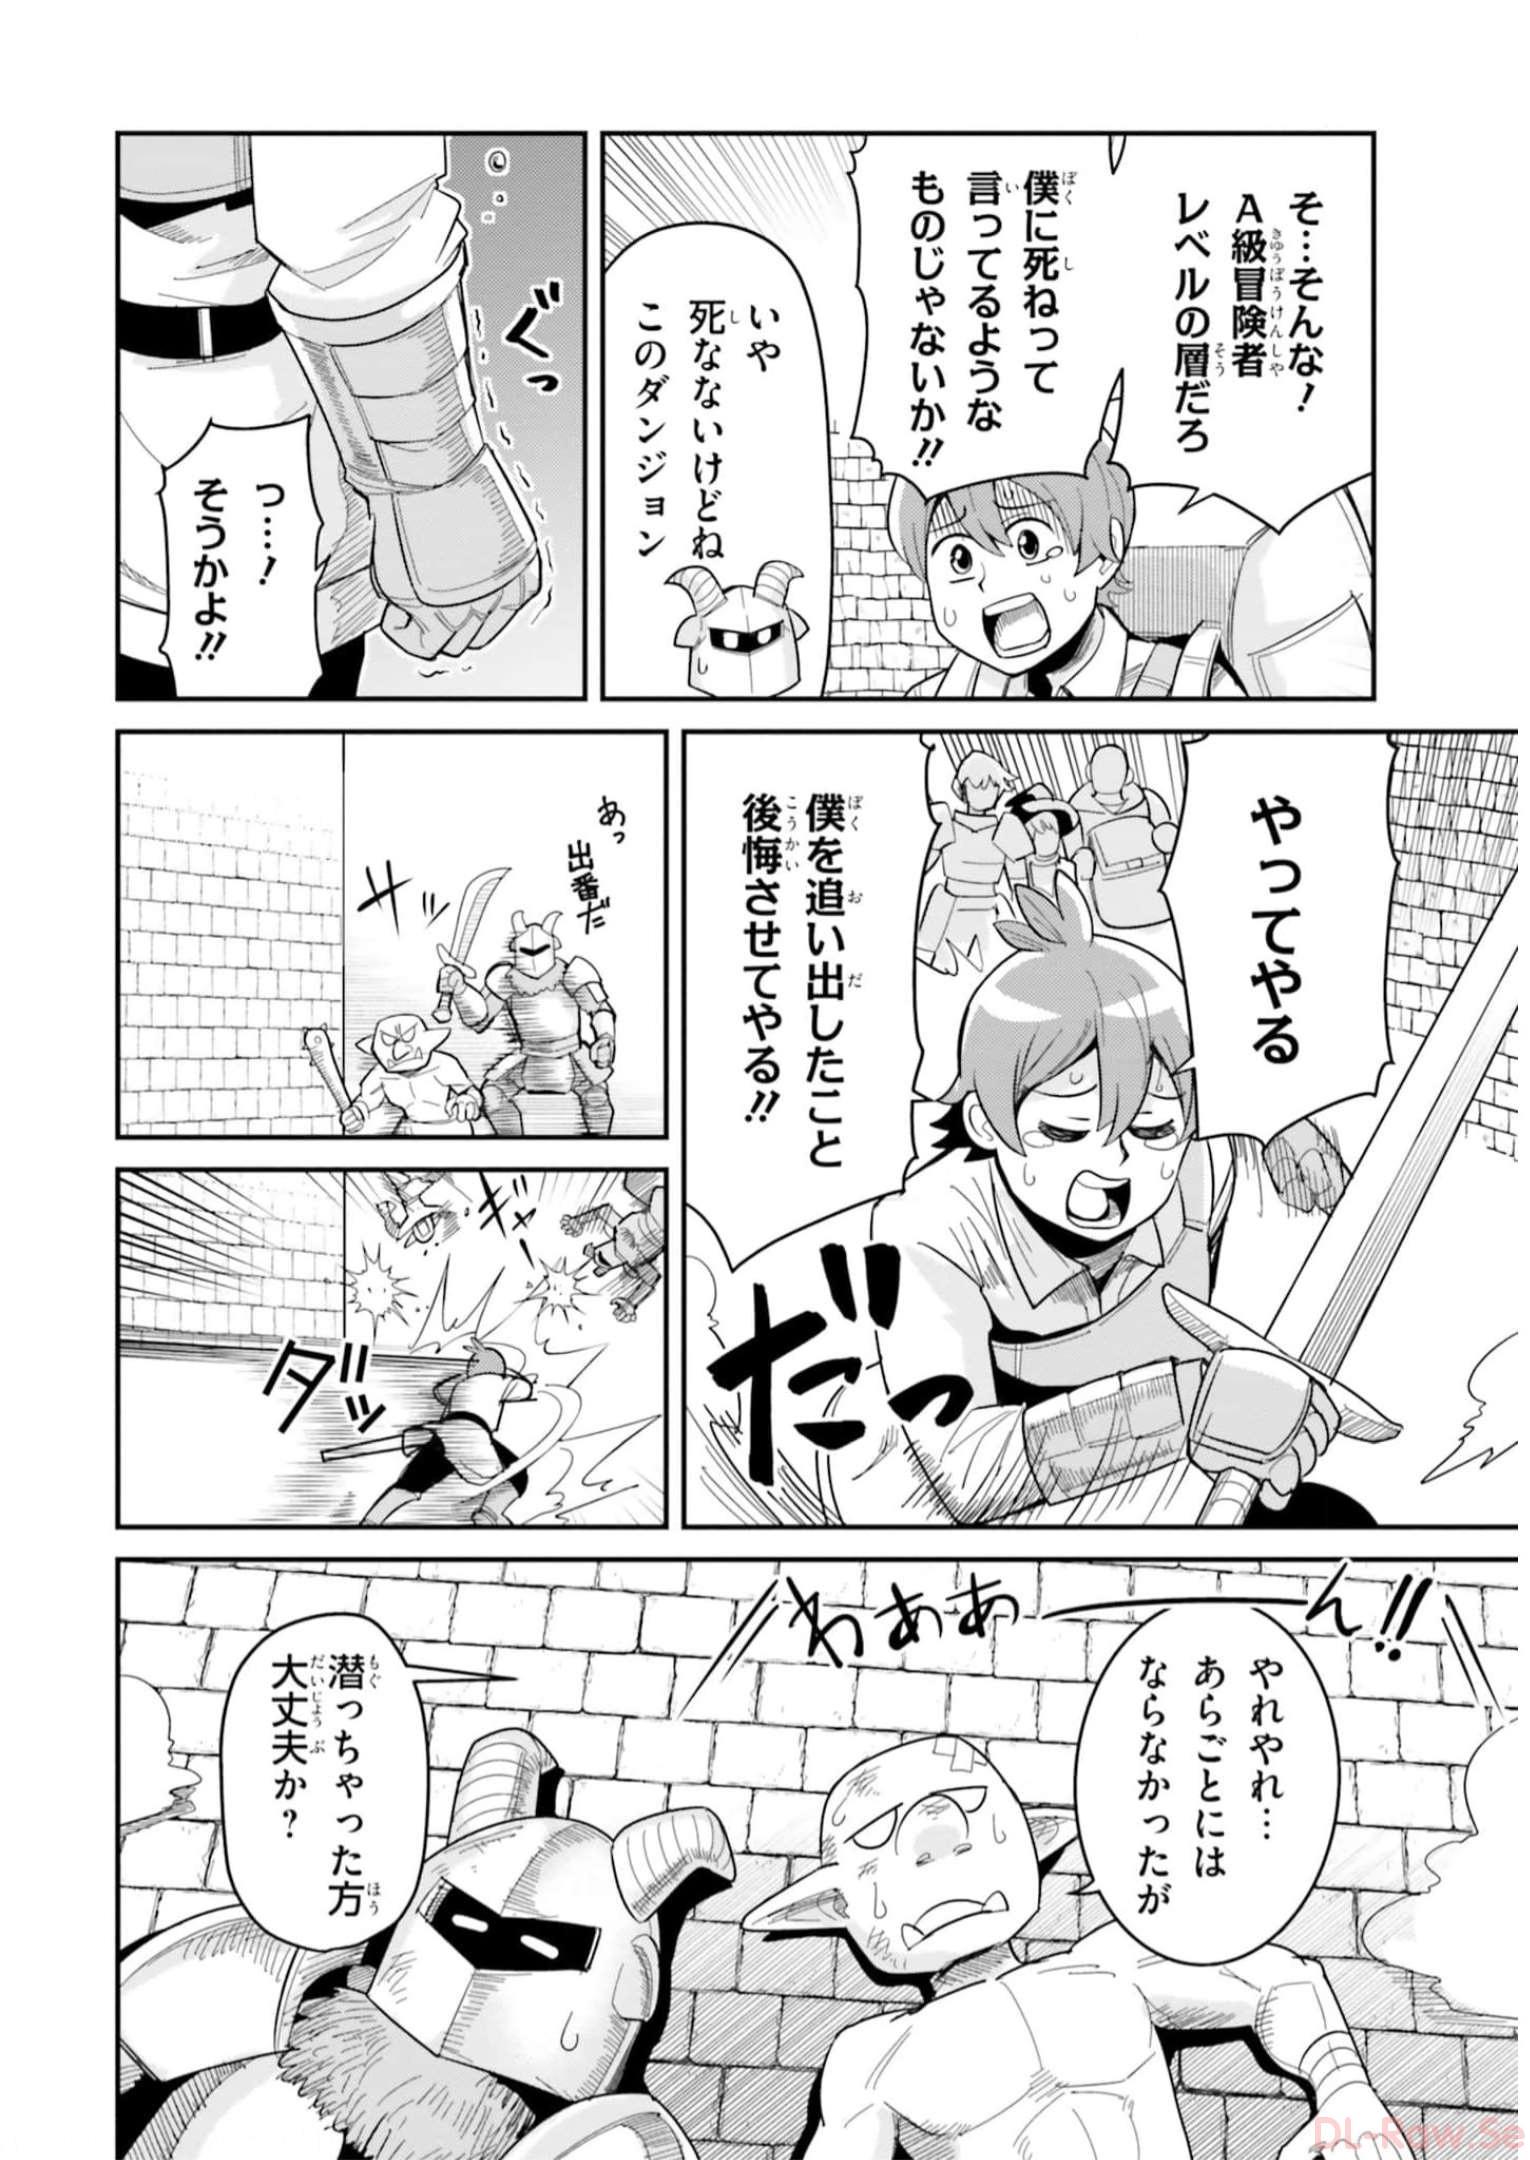 Dungeon Friends Forever Dungeon’s Childhood Friend ダンジョンの幼なじみ 第25話 - Page 6